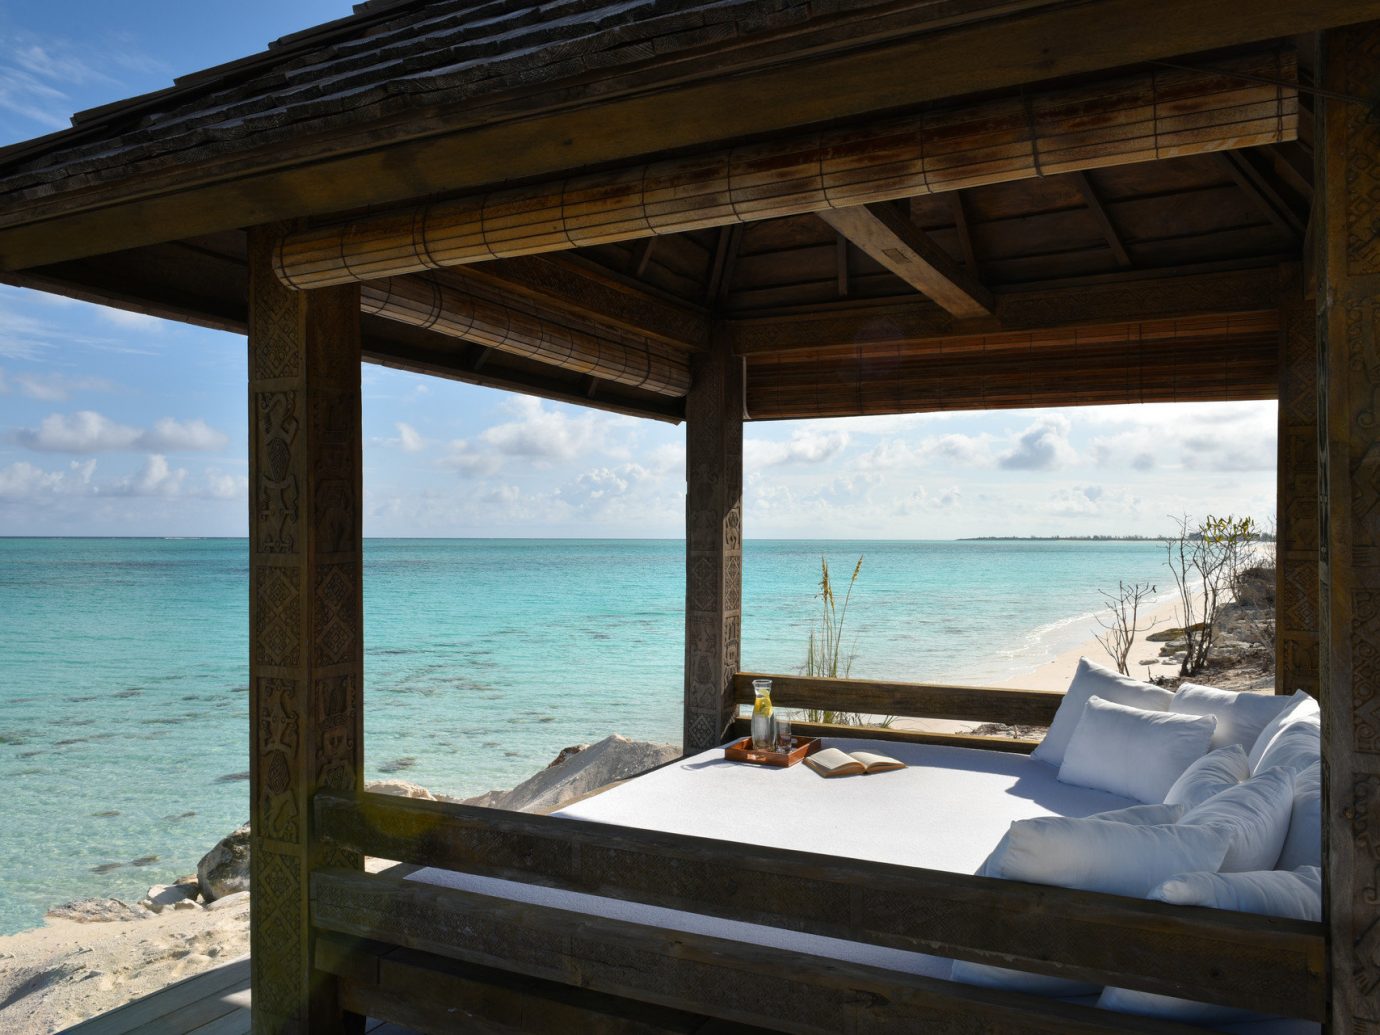 Beach front seating at COMO Parrot Cay, Turks and Caicos